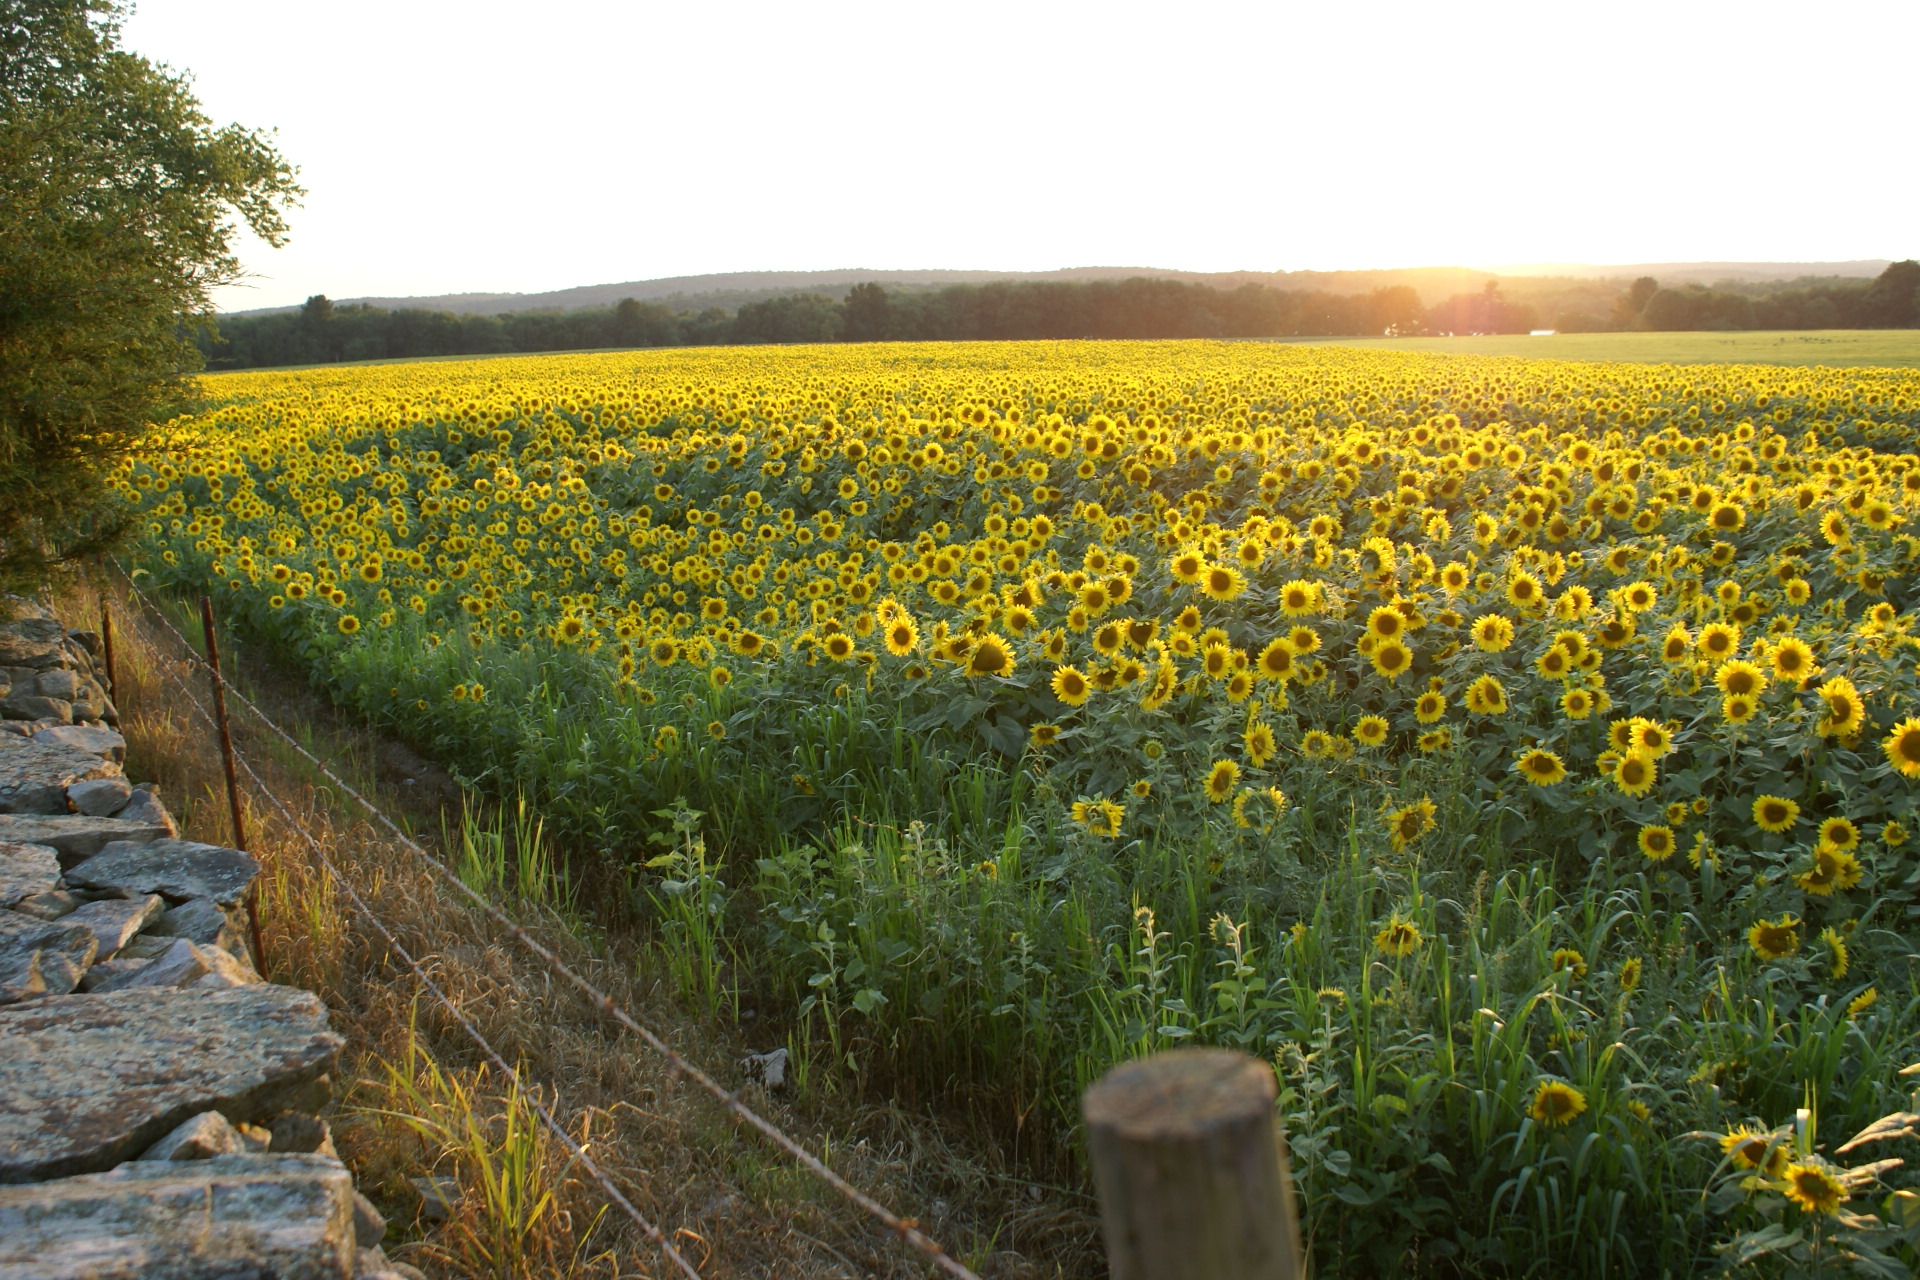 A Field of Sunflowers (user submitted)